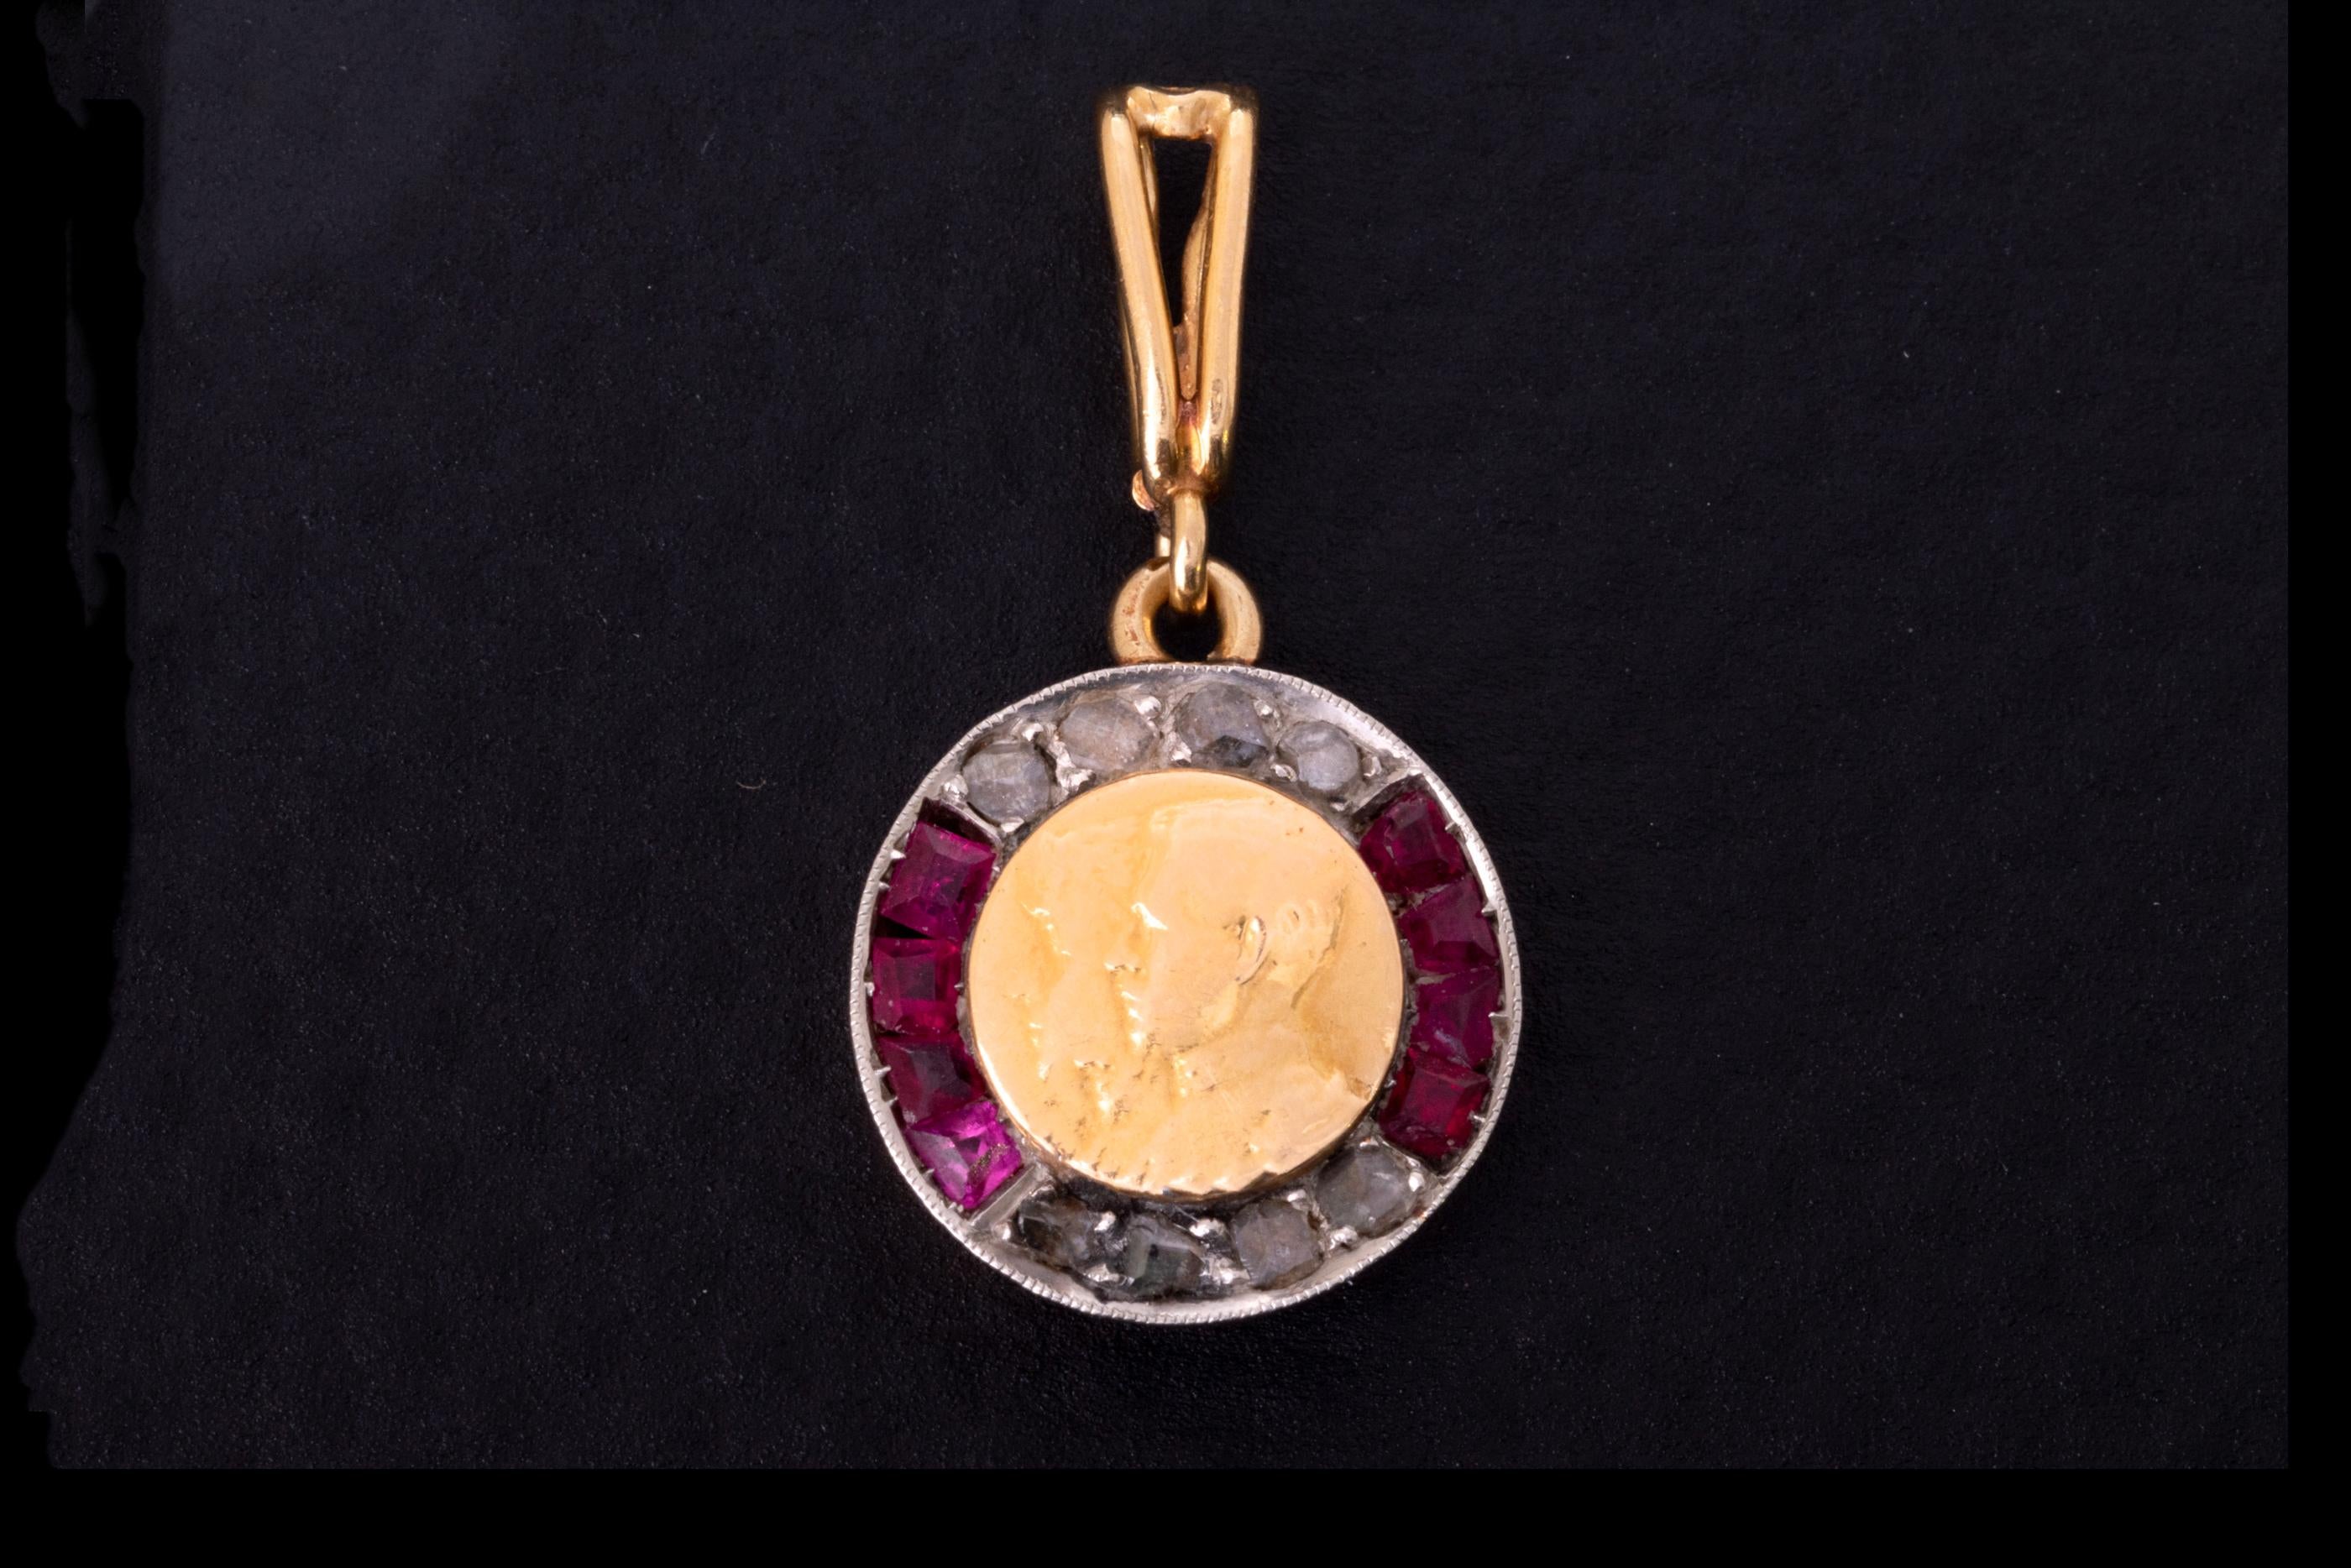 A rare collectible Edwardian charm pendant depicting a royal couple. This 18 ct gold pendant carries a ba-relief of Queen Alexandra and King Edward VII.

Alexandra of Denmark was Queen of the United Kingdom and the British Dominions, and Empress of